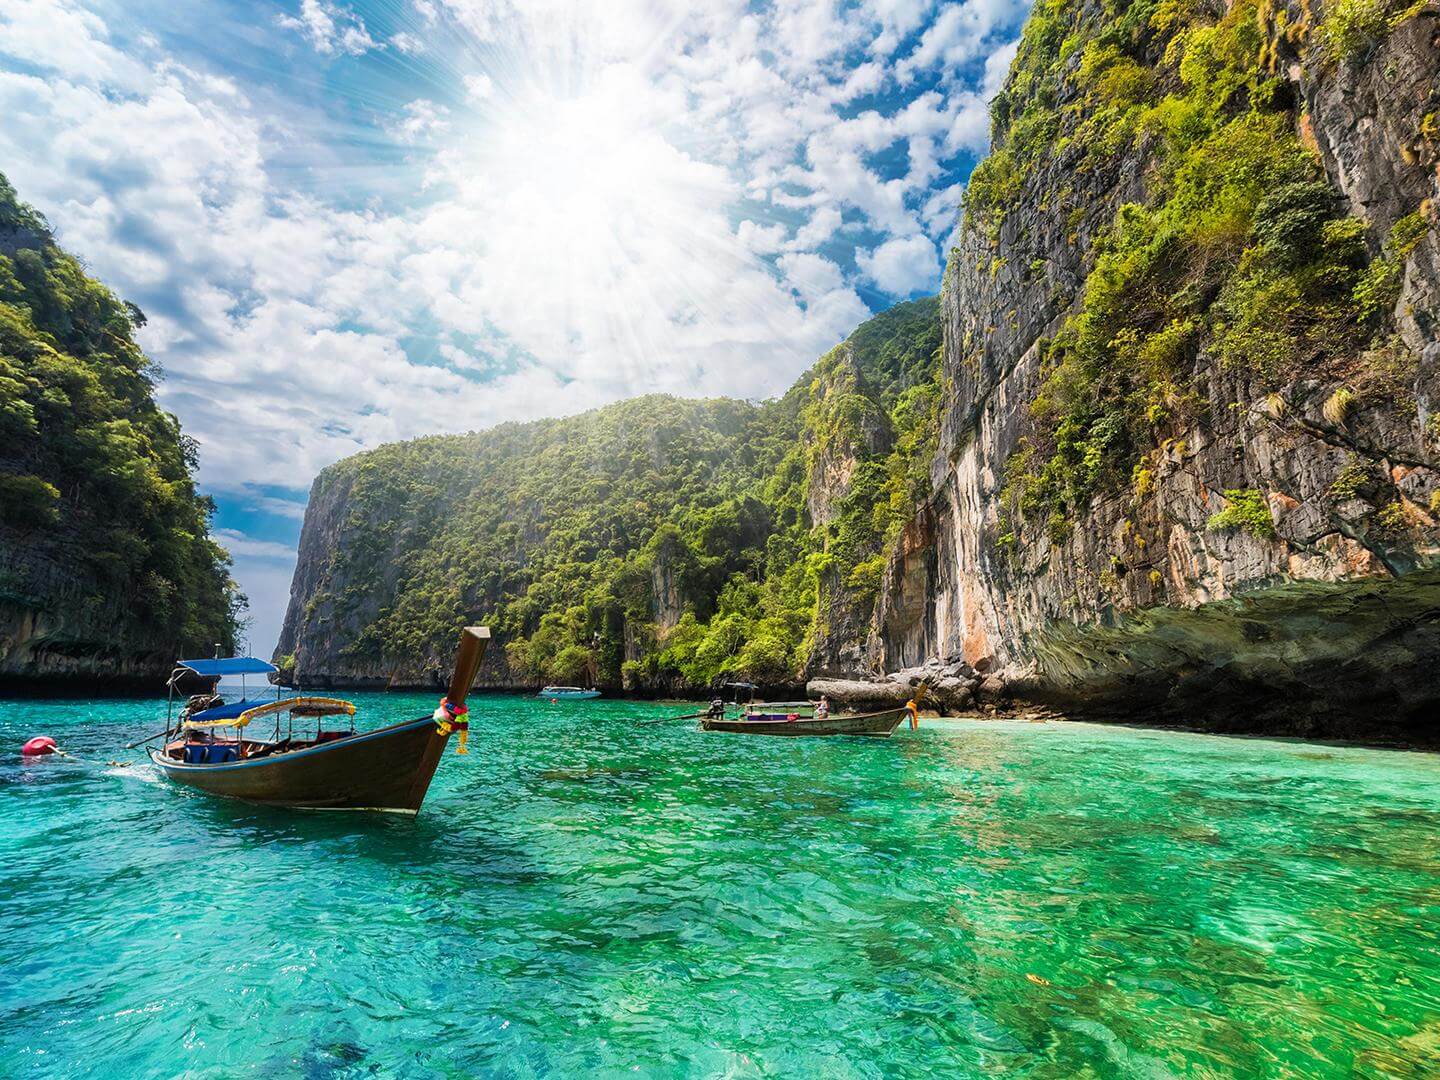 11 Things You HAVE To Do In Phuket